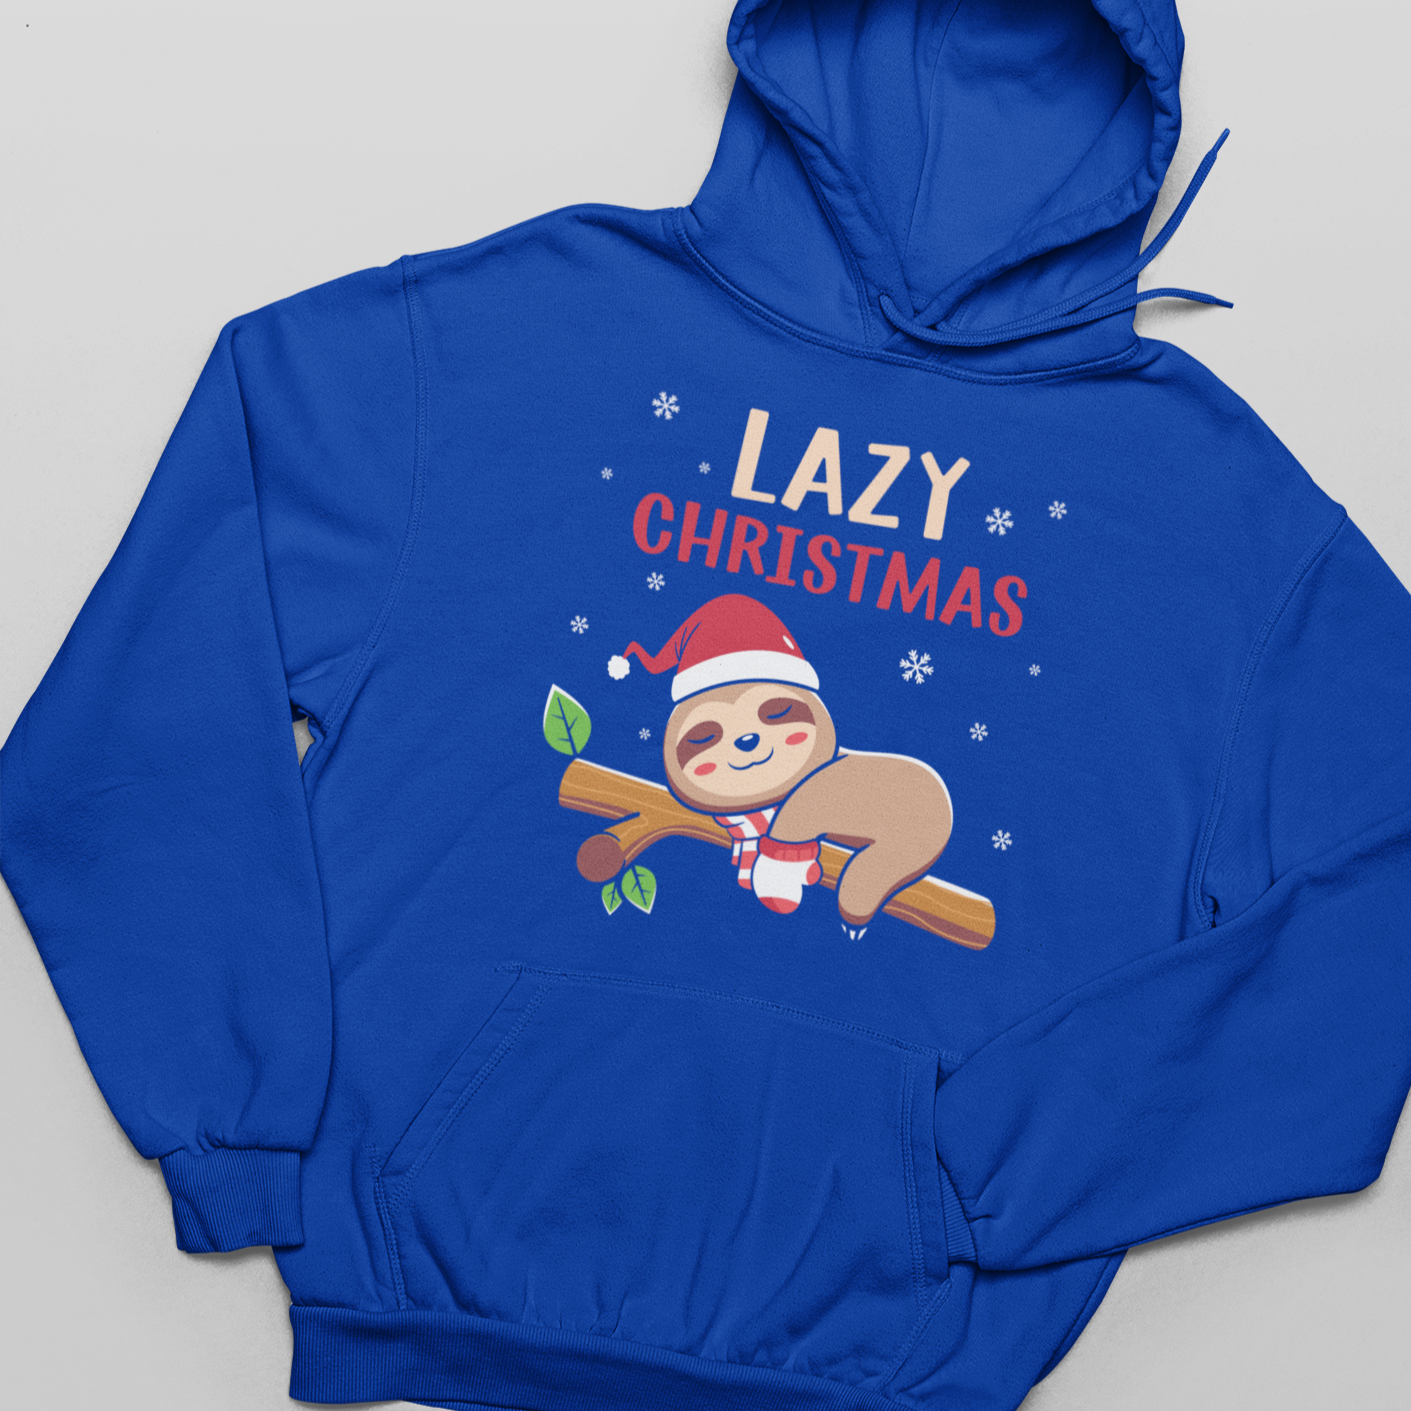 Lazy Christmas - Unisex Pullover Hoodie